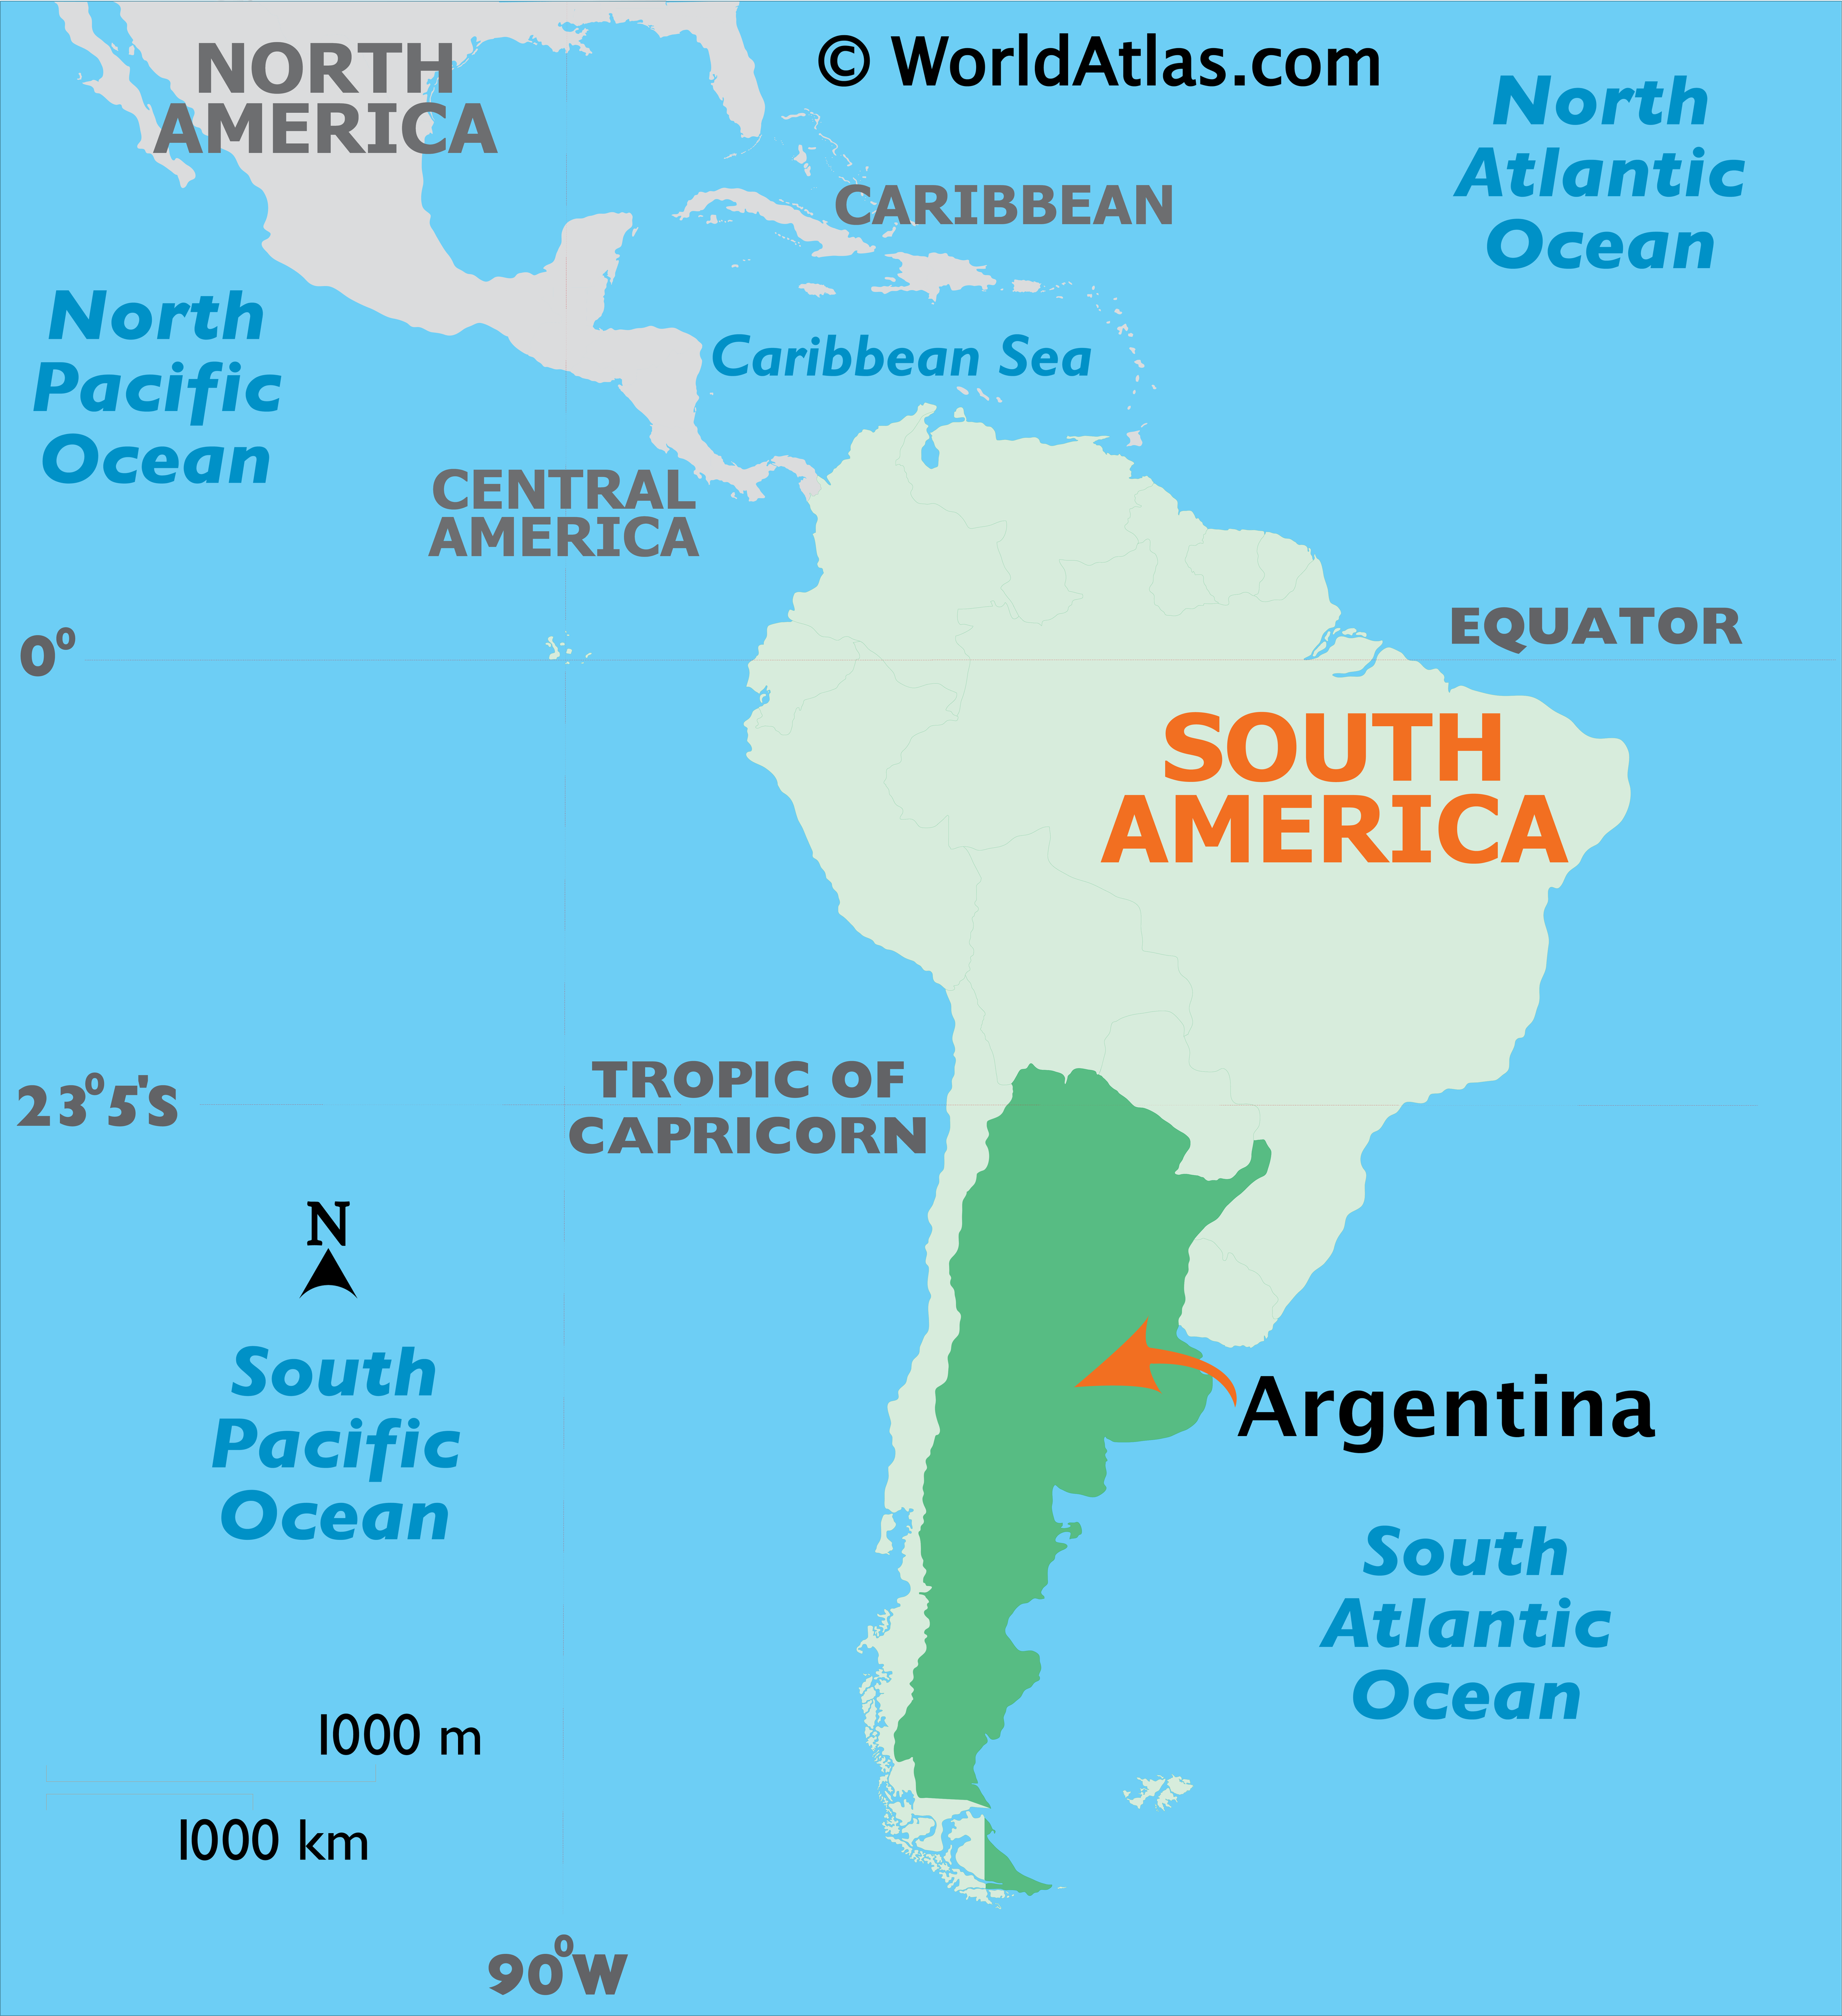 Argentina Map Geography Of Argentina Map Of Argentina